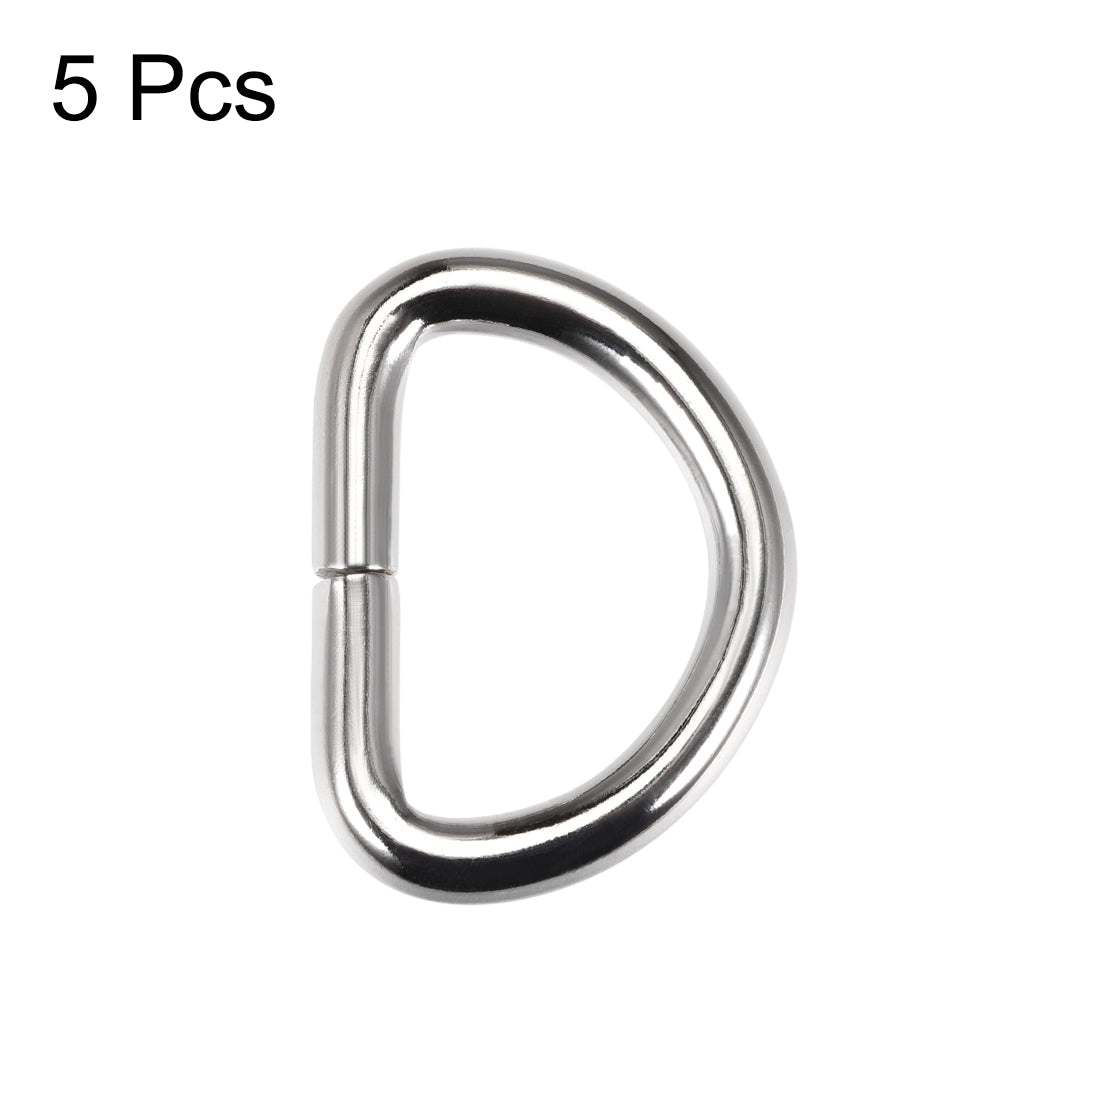 uxcell Uxcell 5 Pcs D Ring Buckle 1 Inch Metal Semi-Circular D-Rings Silver Tone for Hardware Bags Belts Craft DIY Accessories